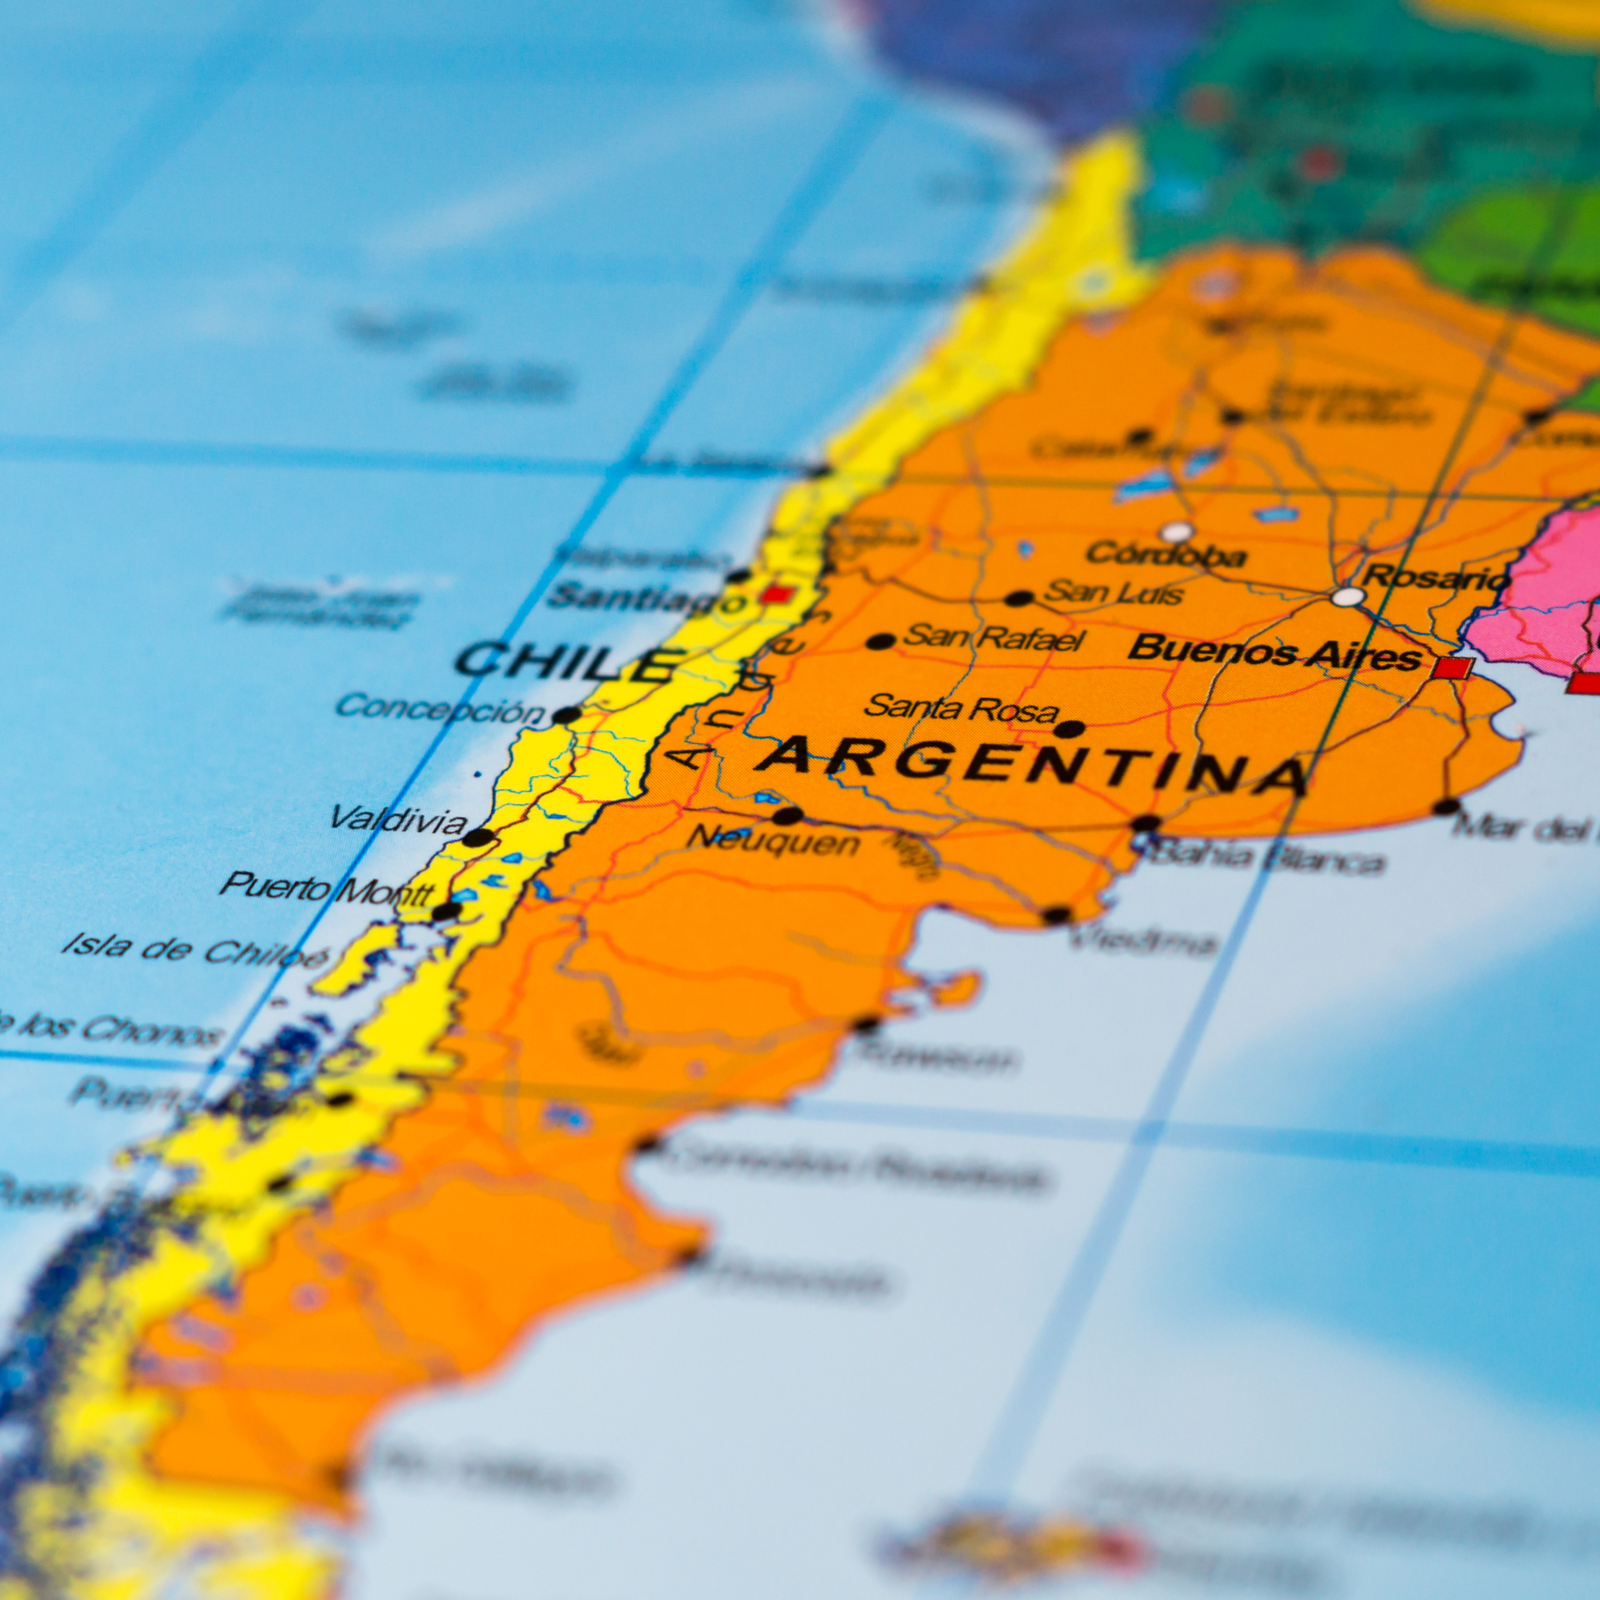 Latin American NGOs Embark Upon Tour to Promote Bitcoin in Argentina